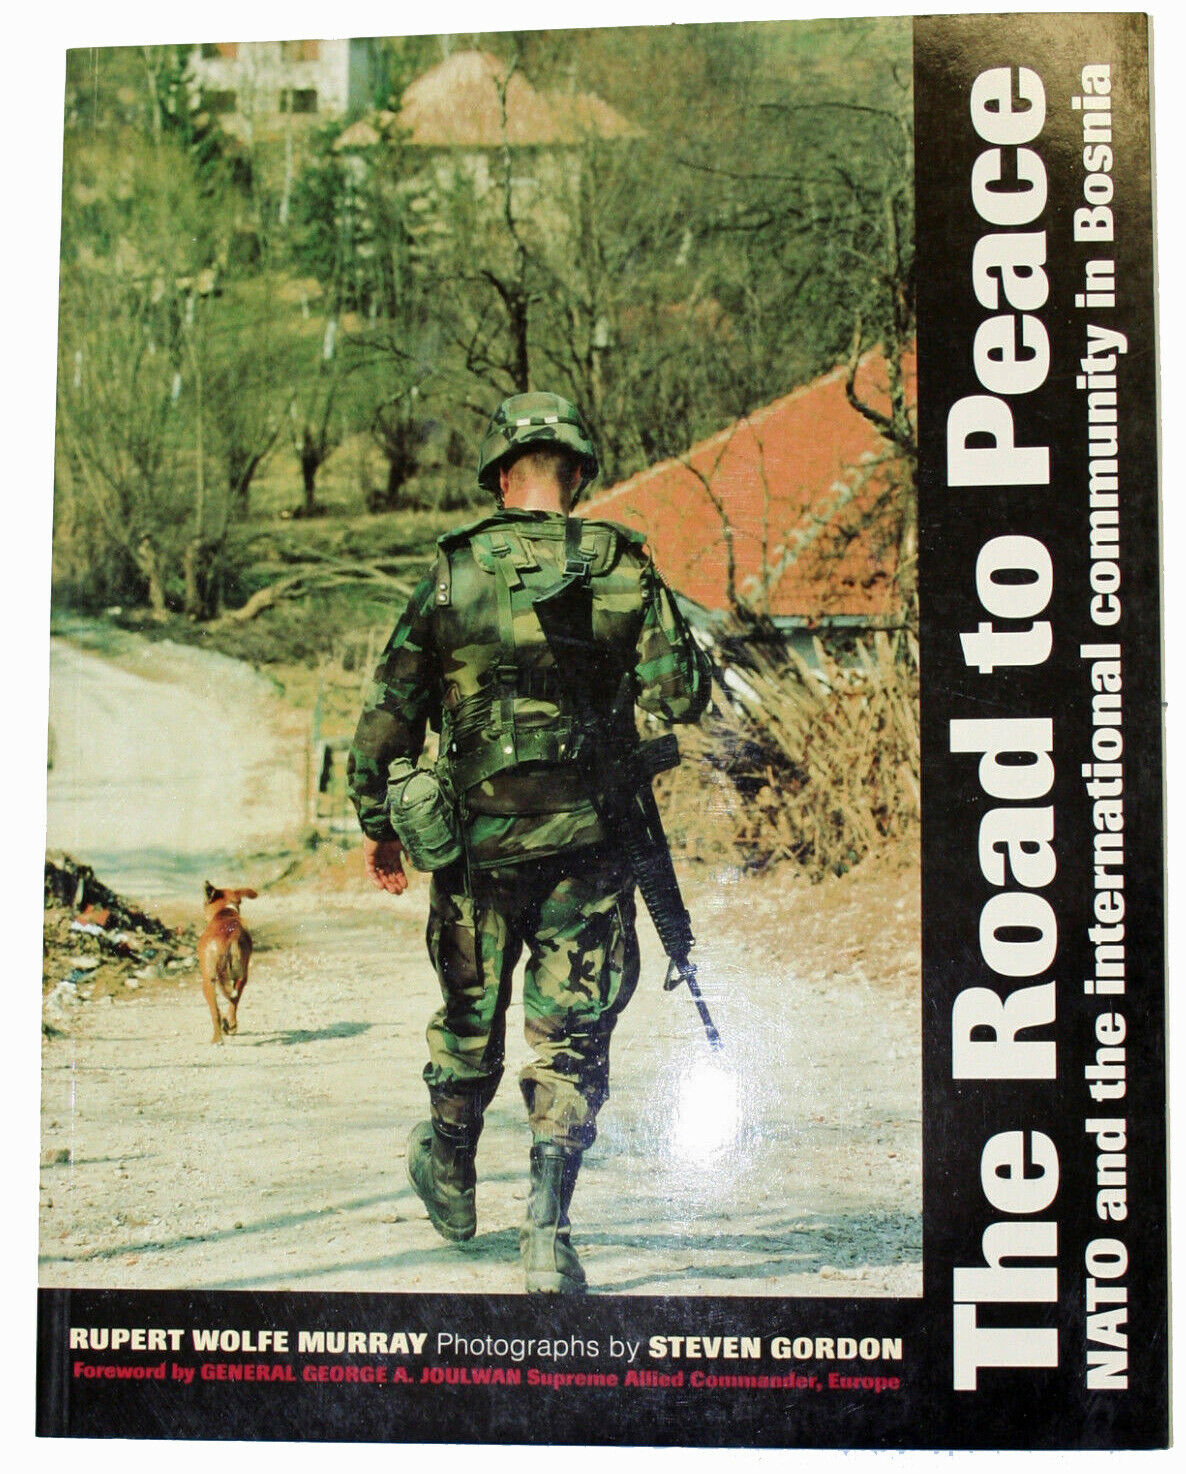 sfor bosnia book Road to Peace NATO and the International Community in Bosnia